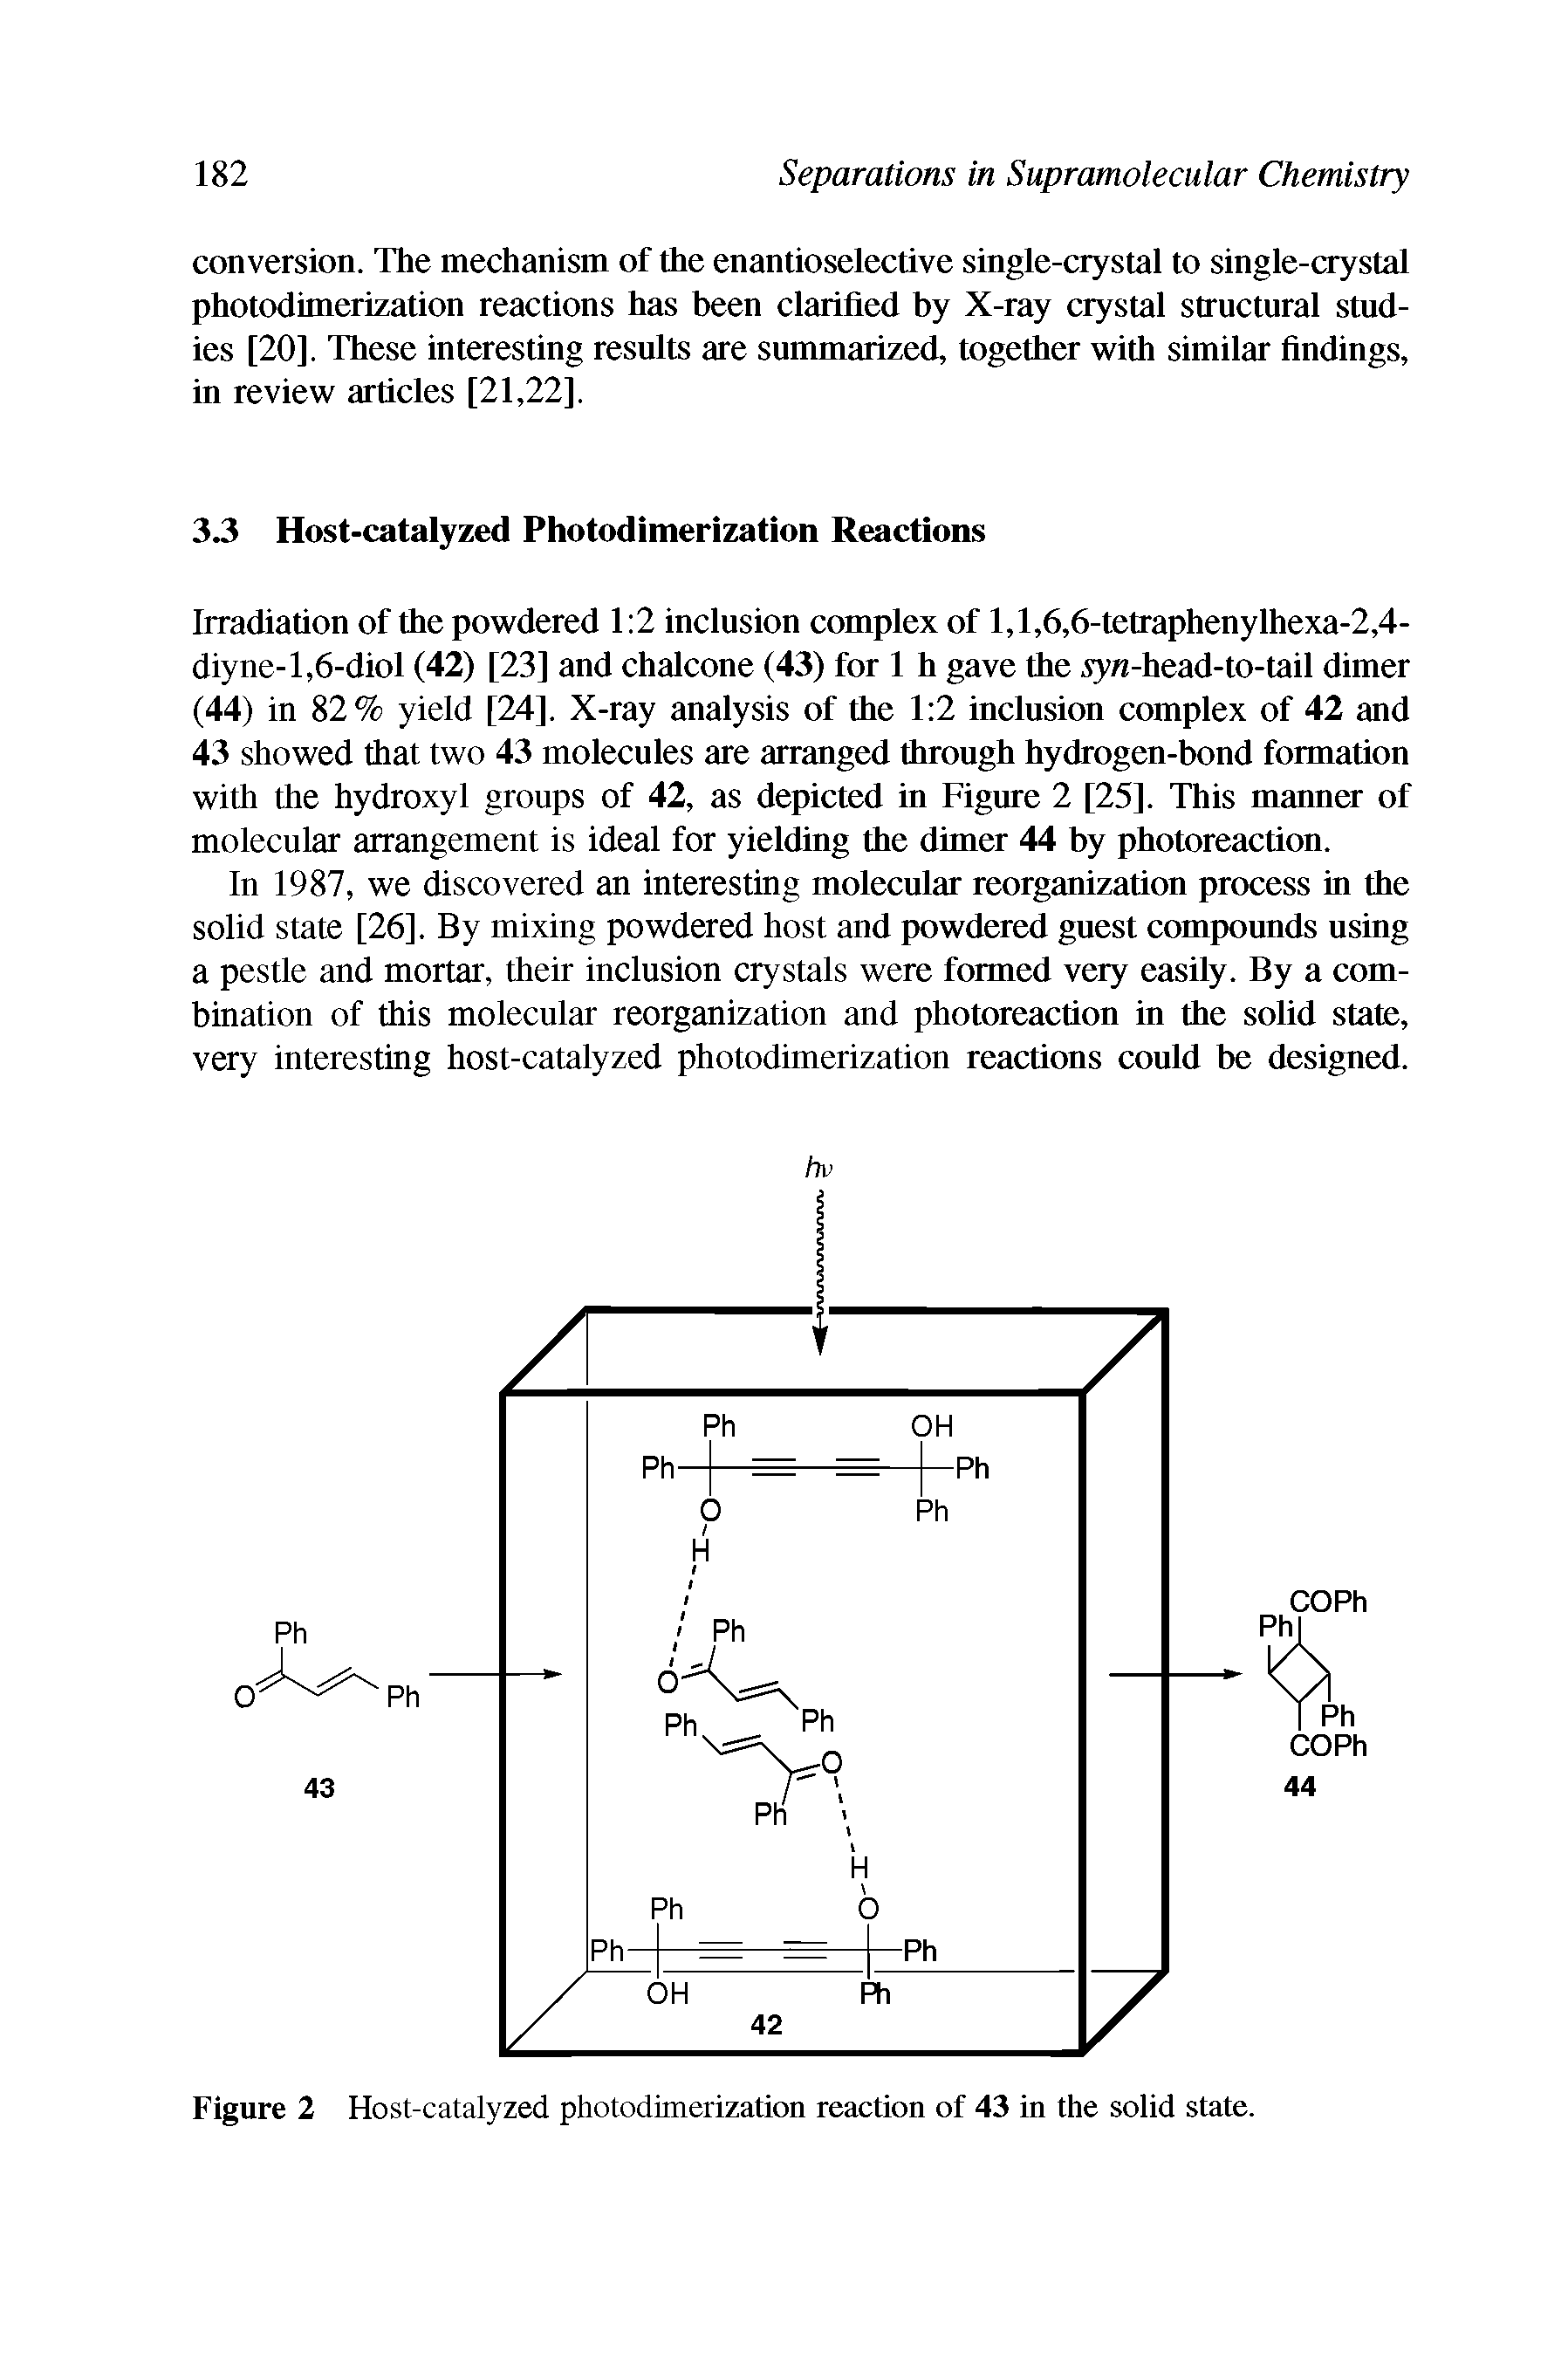 Figure 2 Host-catalyzed photodimerization reaction of 43 in the solid state.